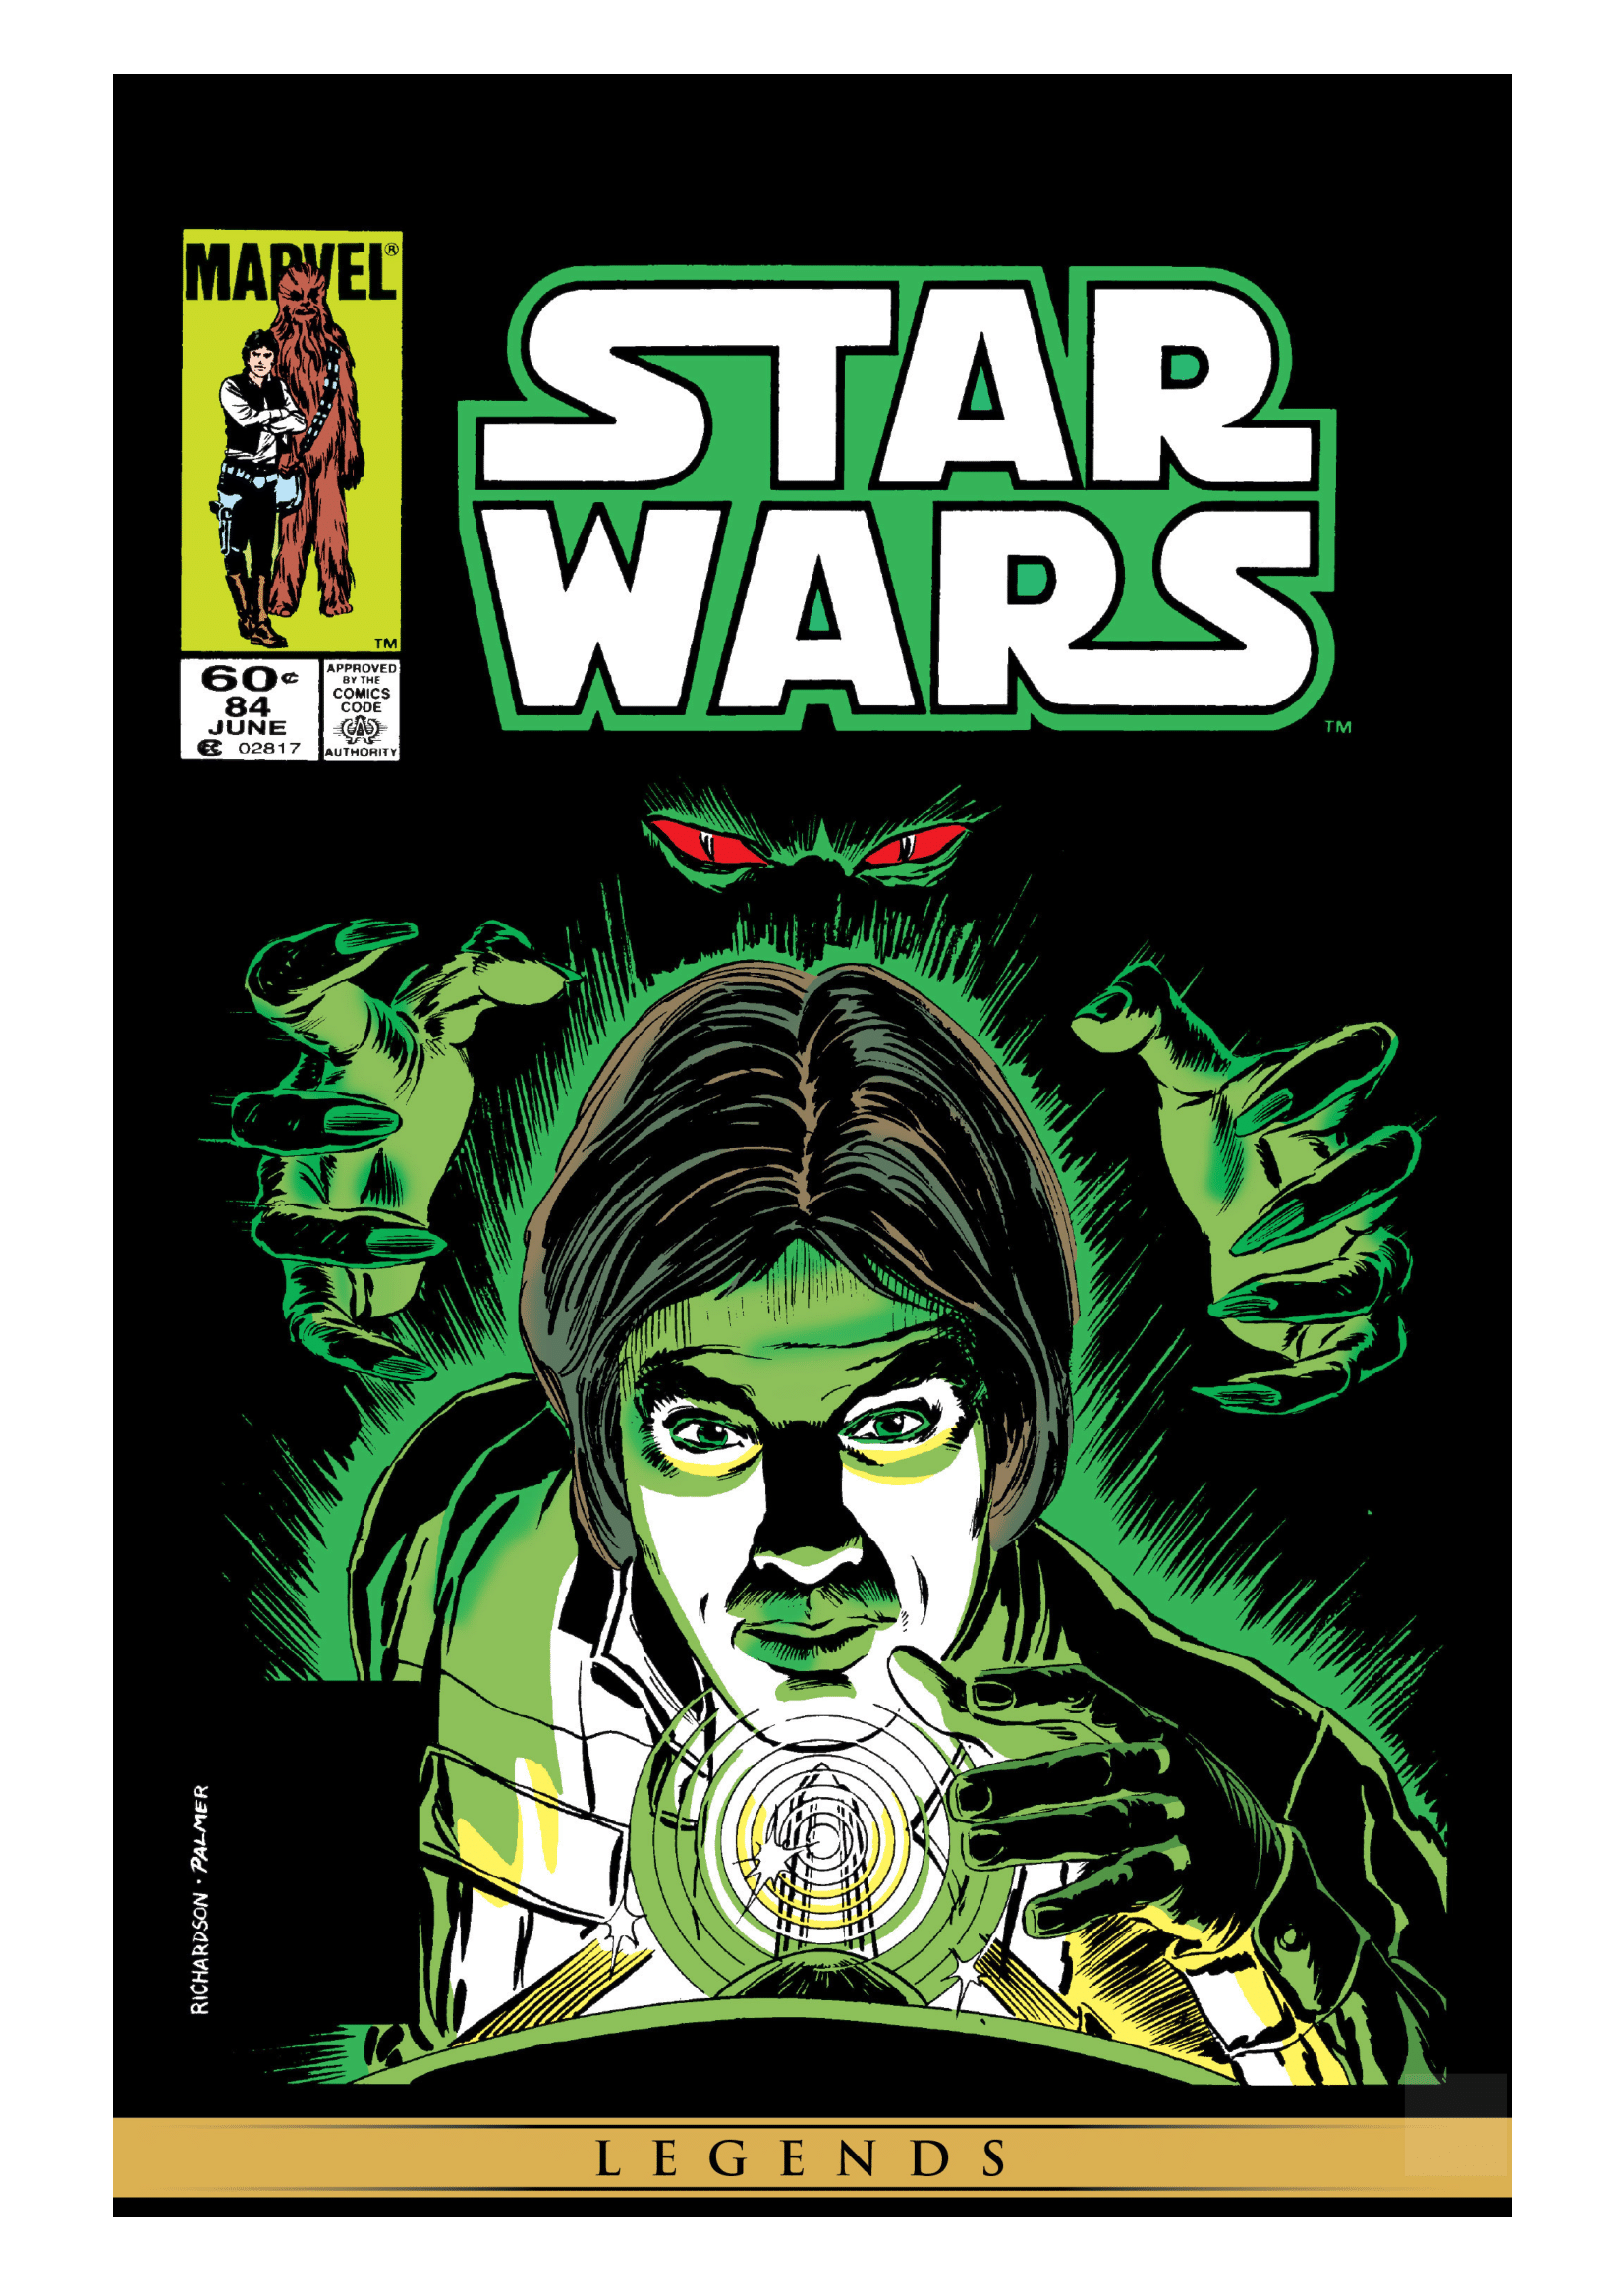 Star Wars (1977) Issue #_84 - Read Star Wars (1977) Issue #_84 comic online in high quality-02.png